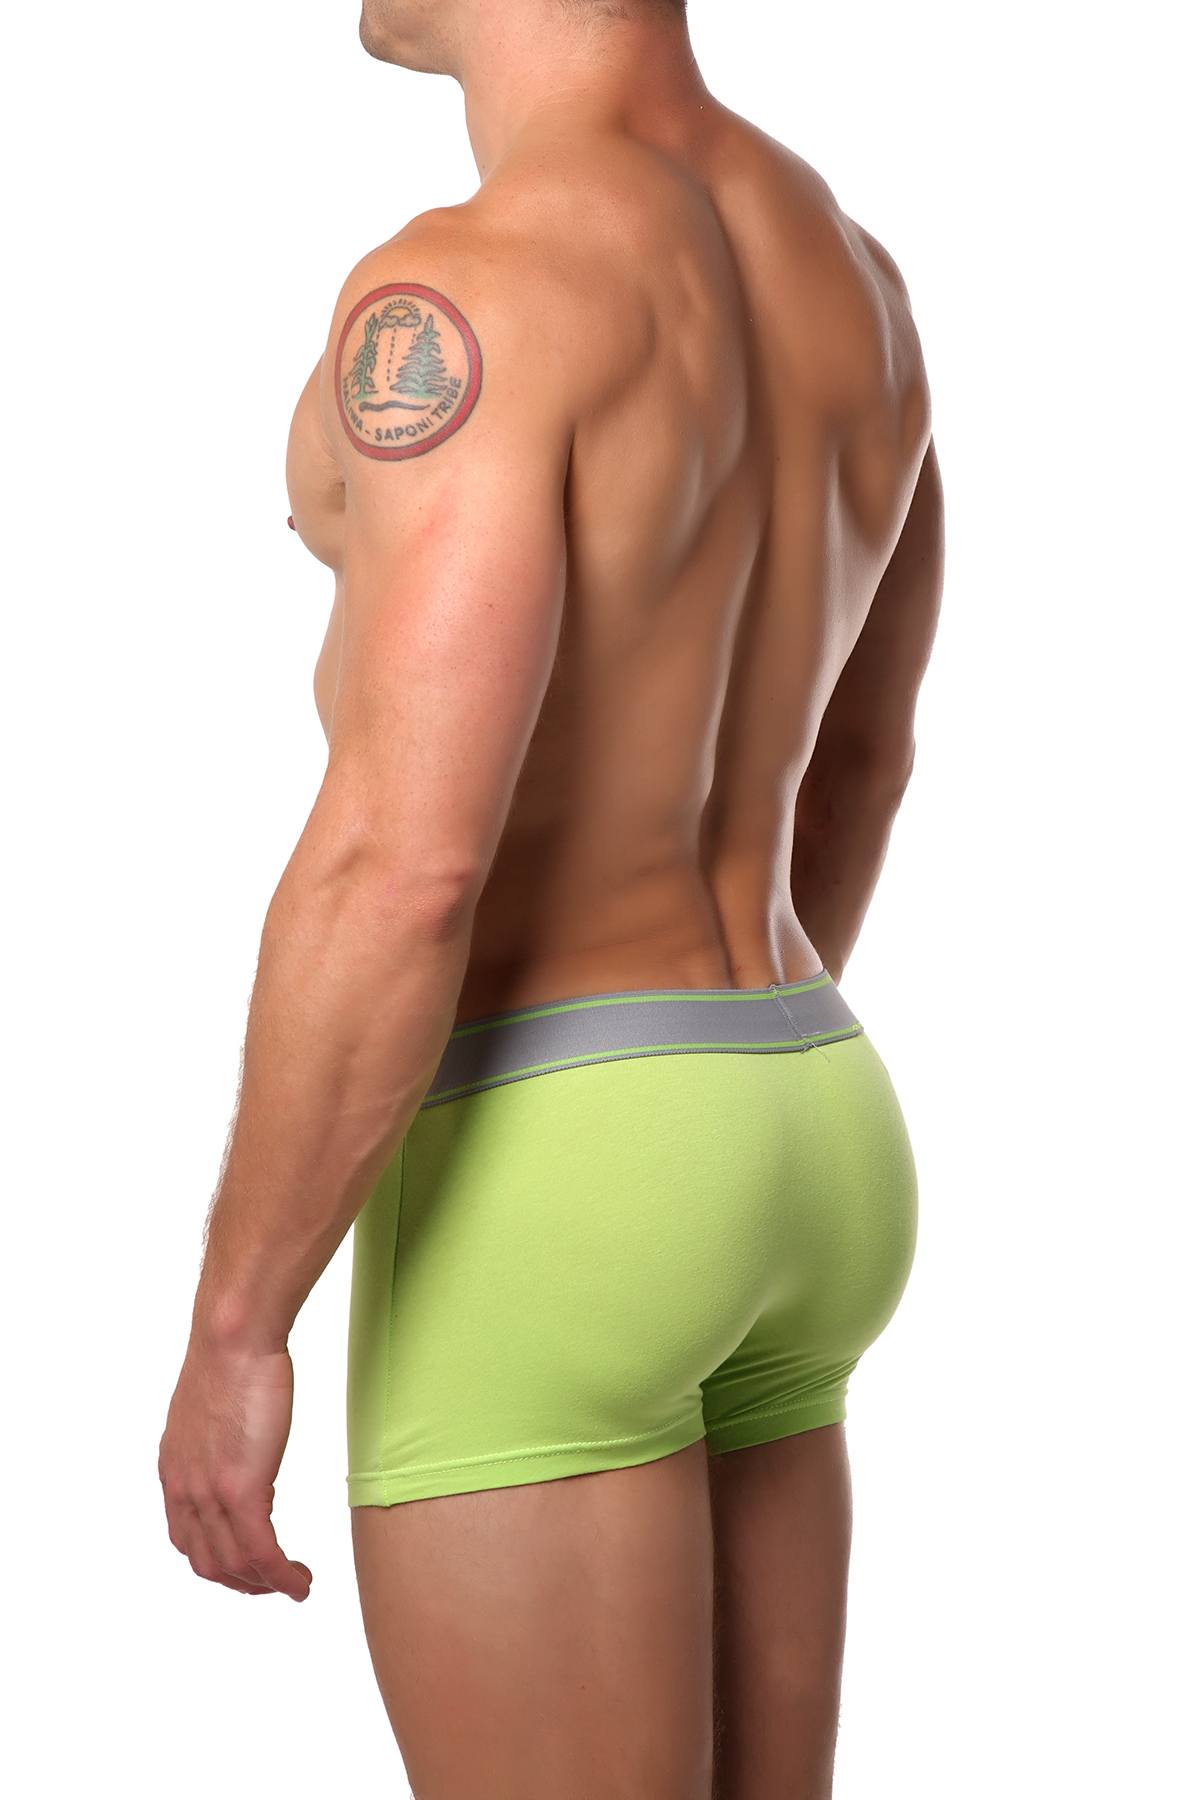 Lick Lime Graphic Boxer-Trunk